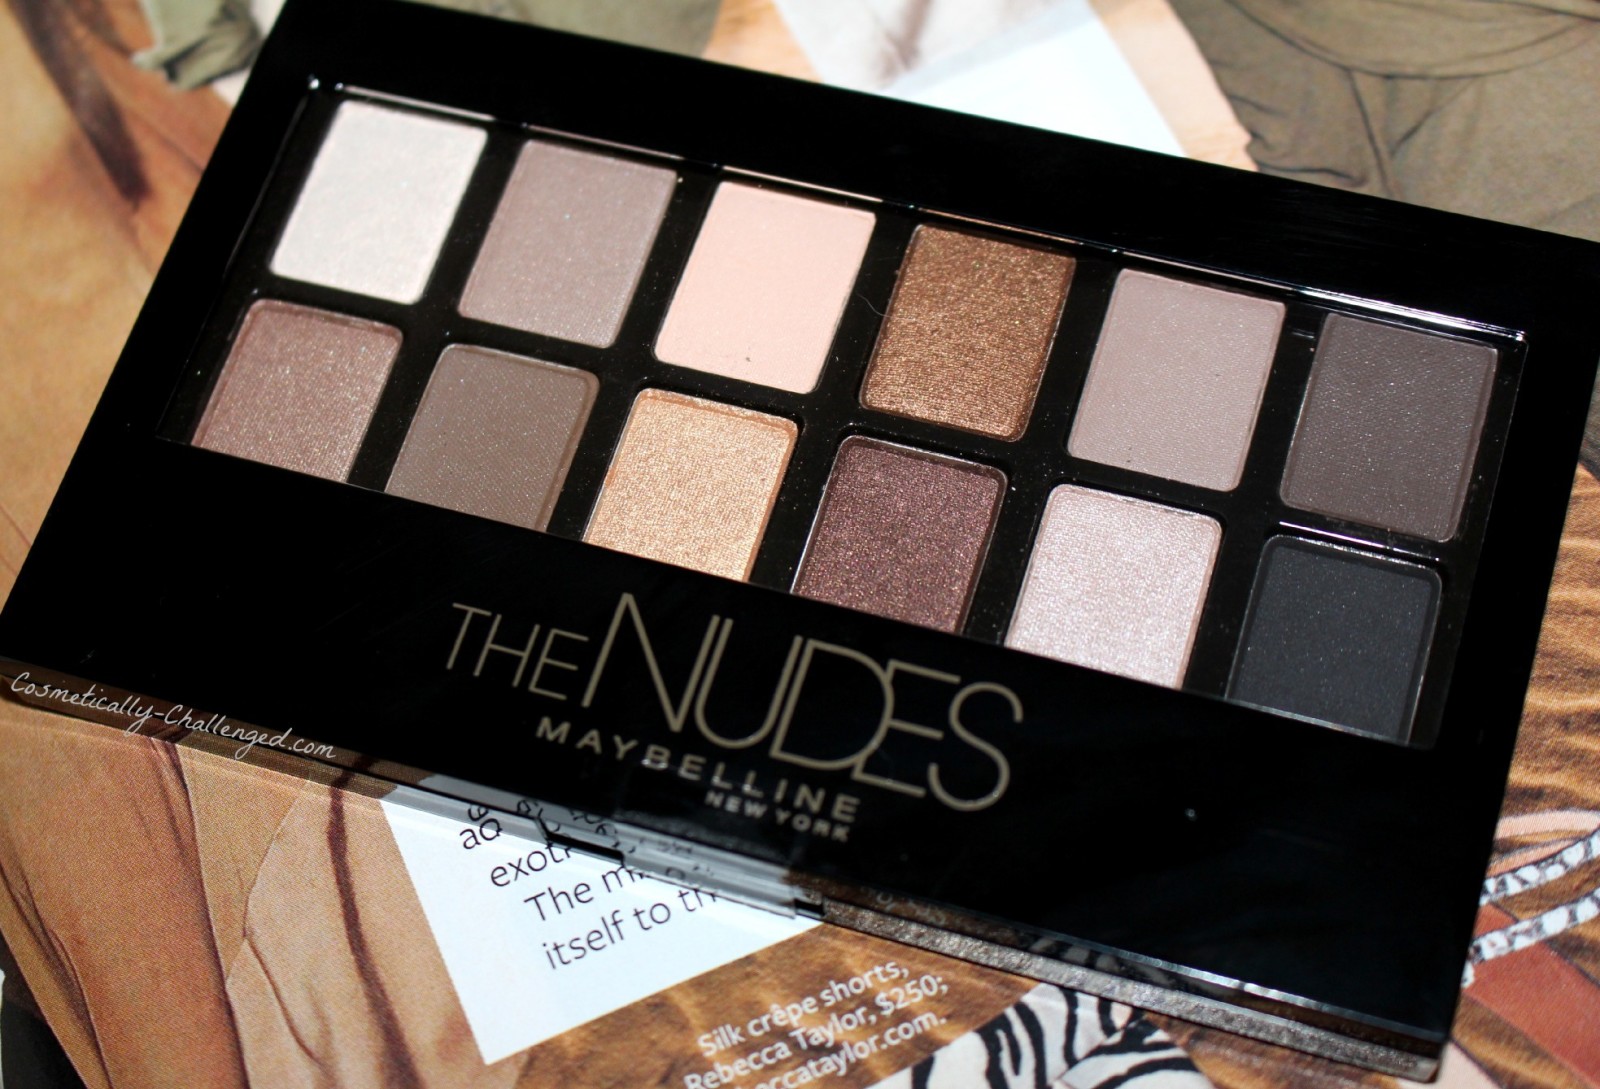 Maybelline “The Nudes” Palette Review/Swatches and Give Away!